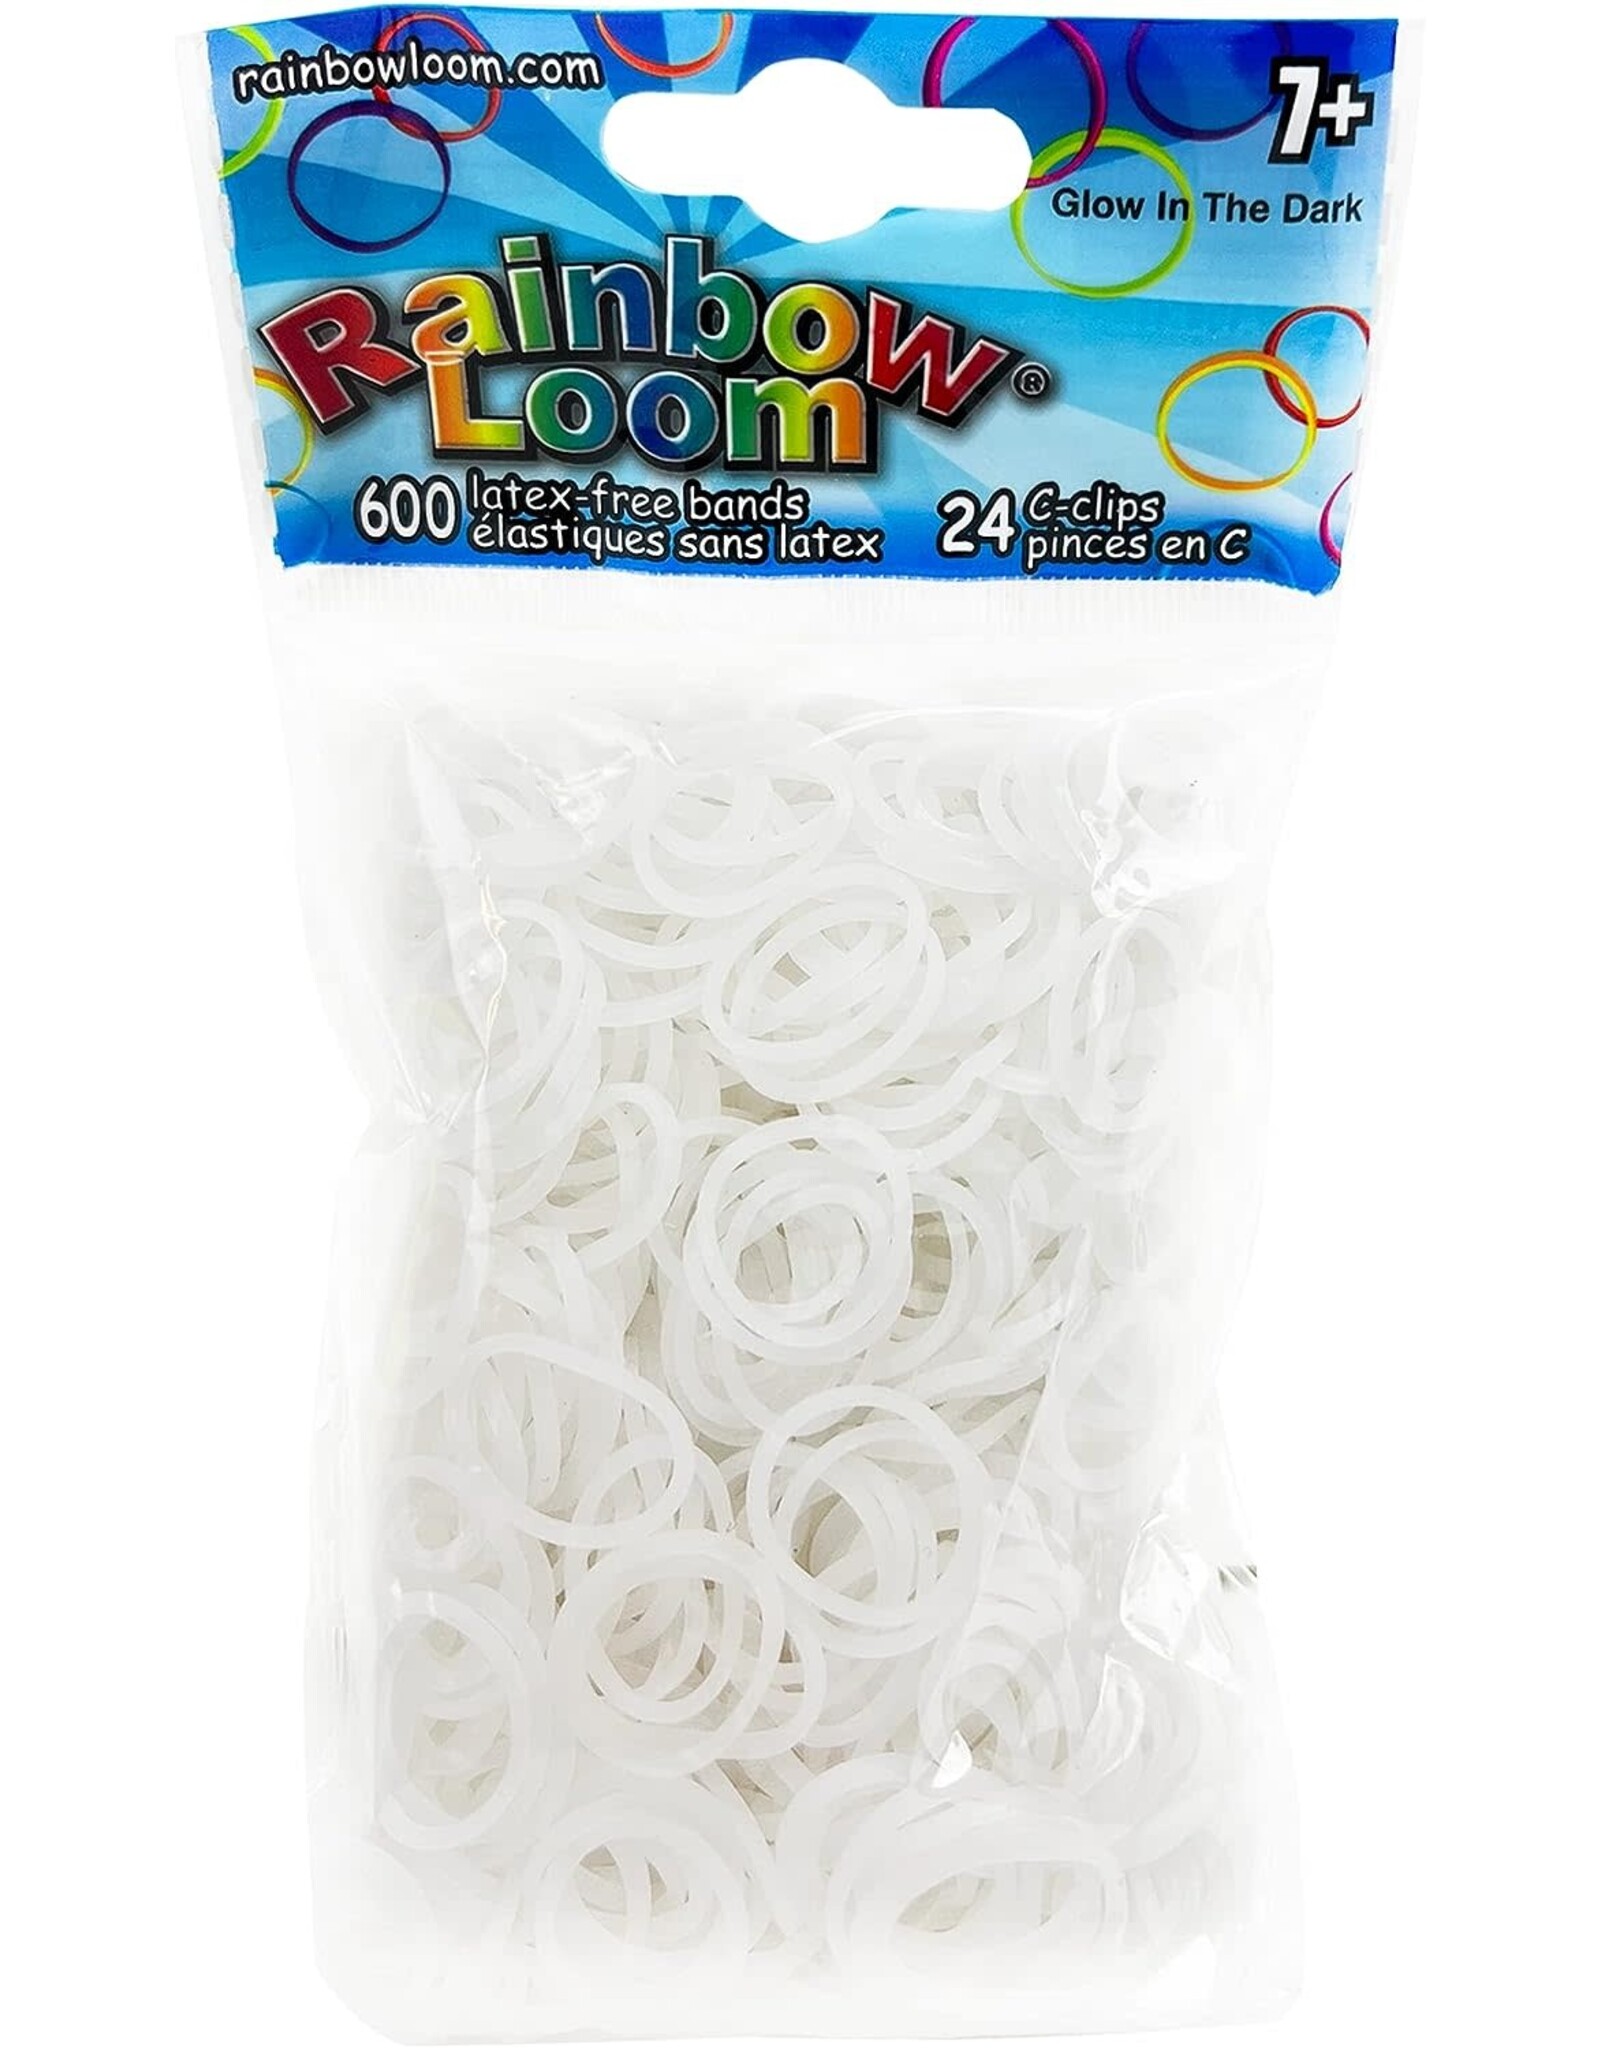 Rainbow Loom Refill Bands: Solid Glow in the Dark - Wit & Whimsy Toys